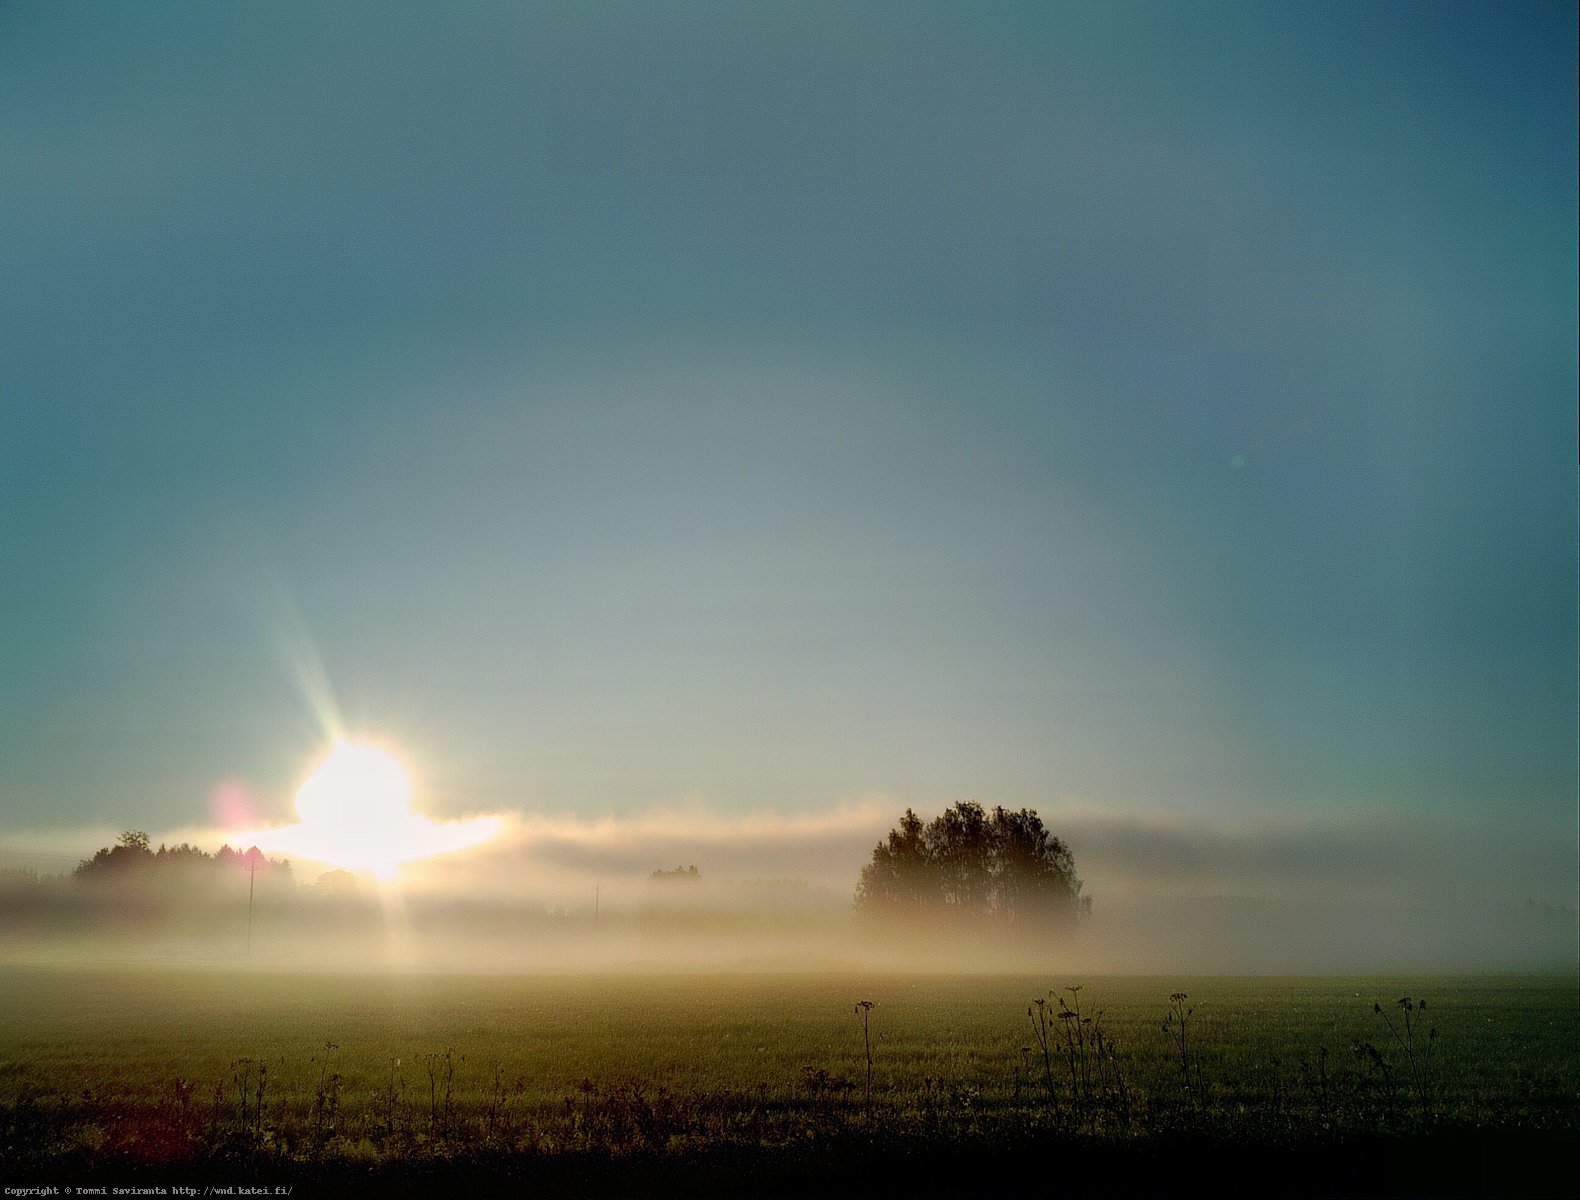 Early morning in Finland